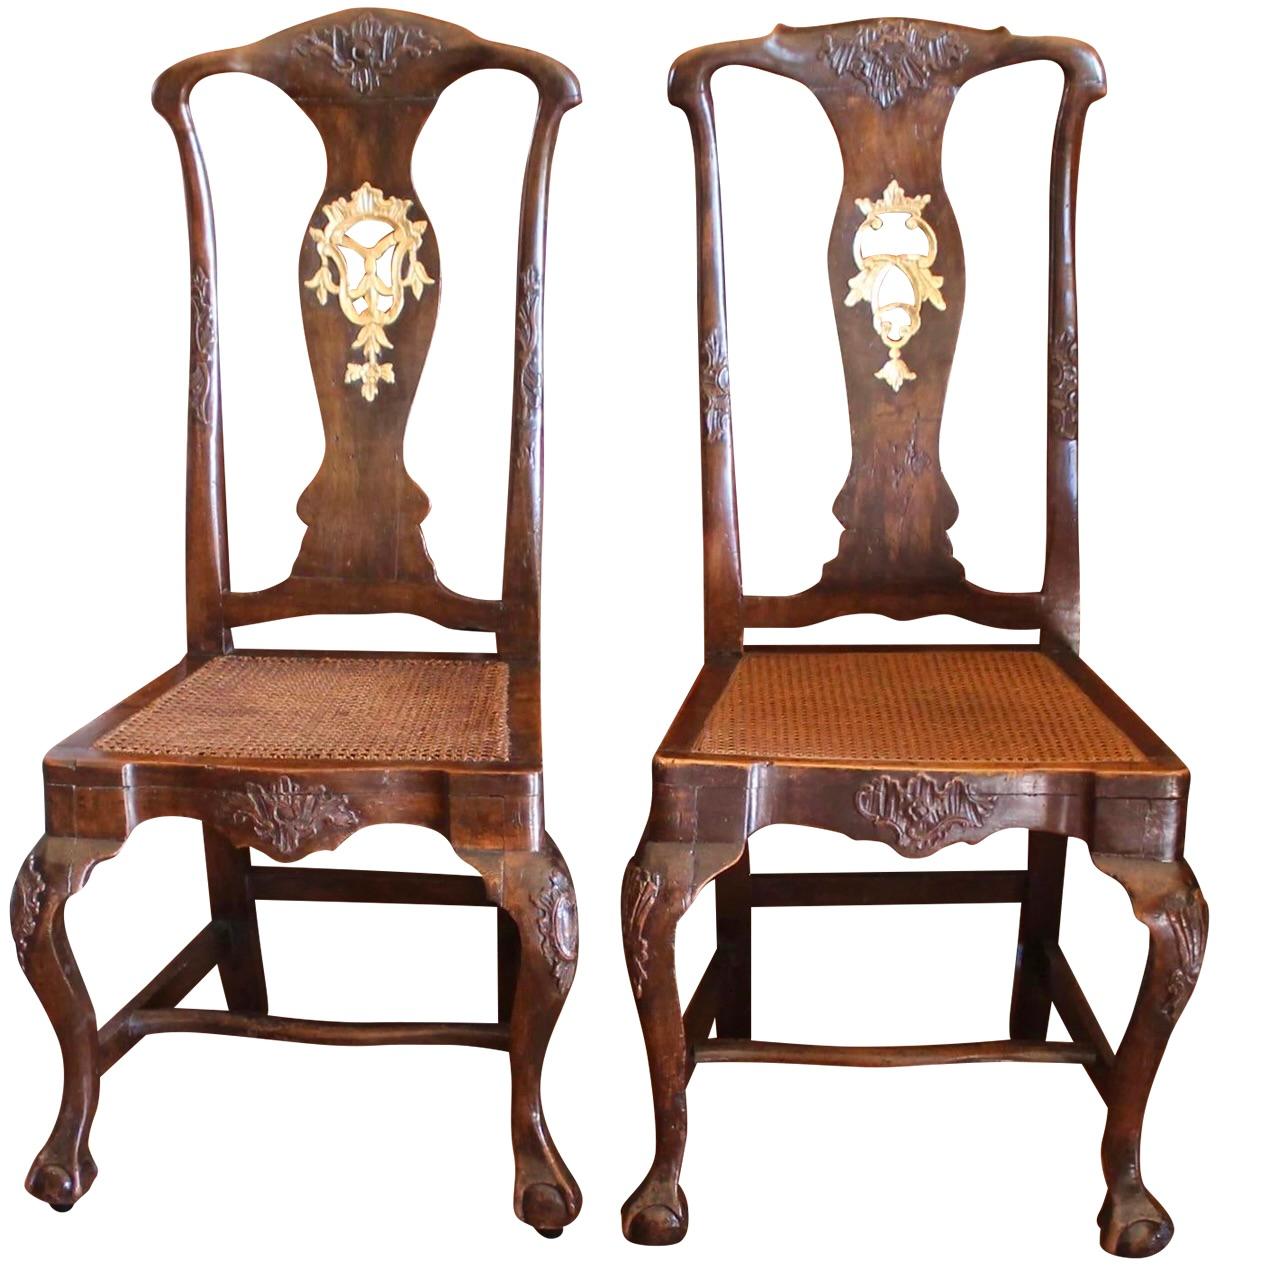 A near pair of very elegant carved walnut Portuguese chairs with parcel gilding, almost certainly from a larger set of dining chairs. Within the English inspired format of  ball and claw footed chairs, the carved Rococo elements have greater flare